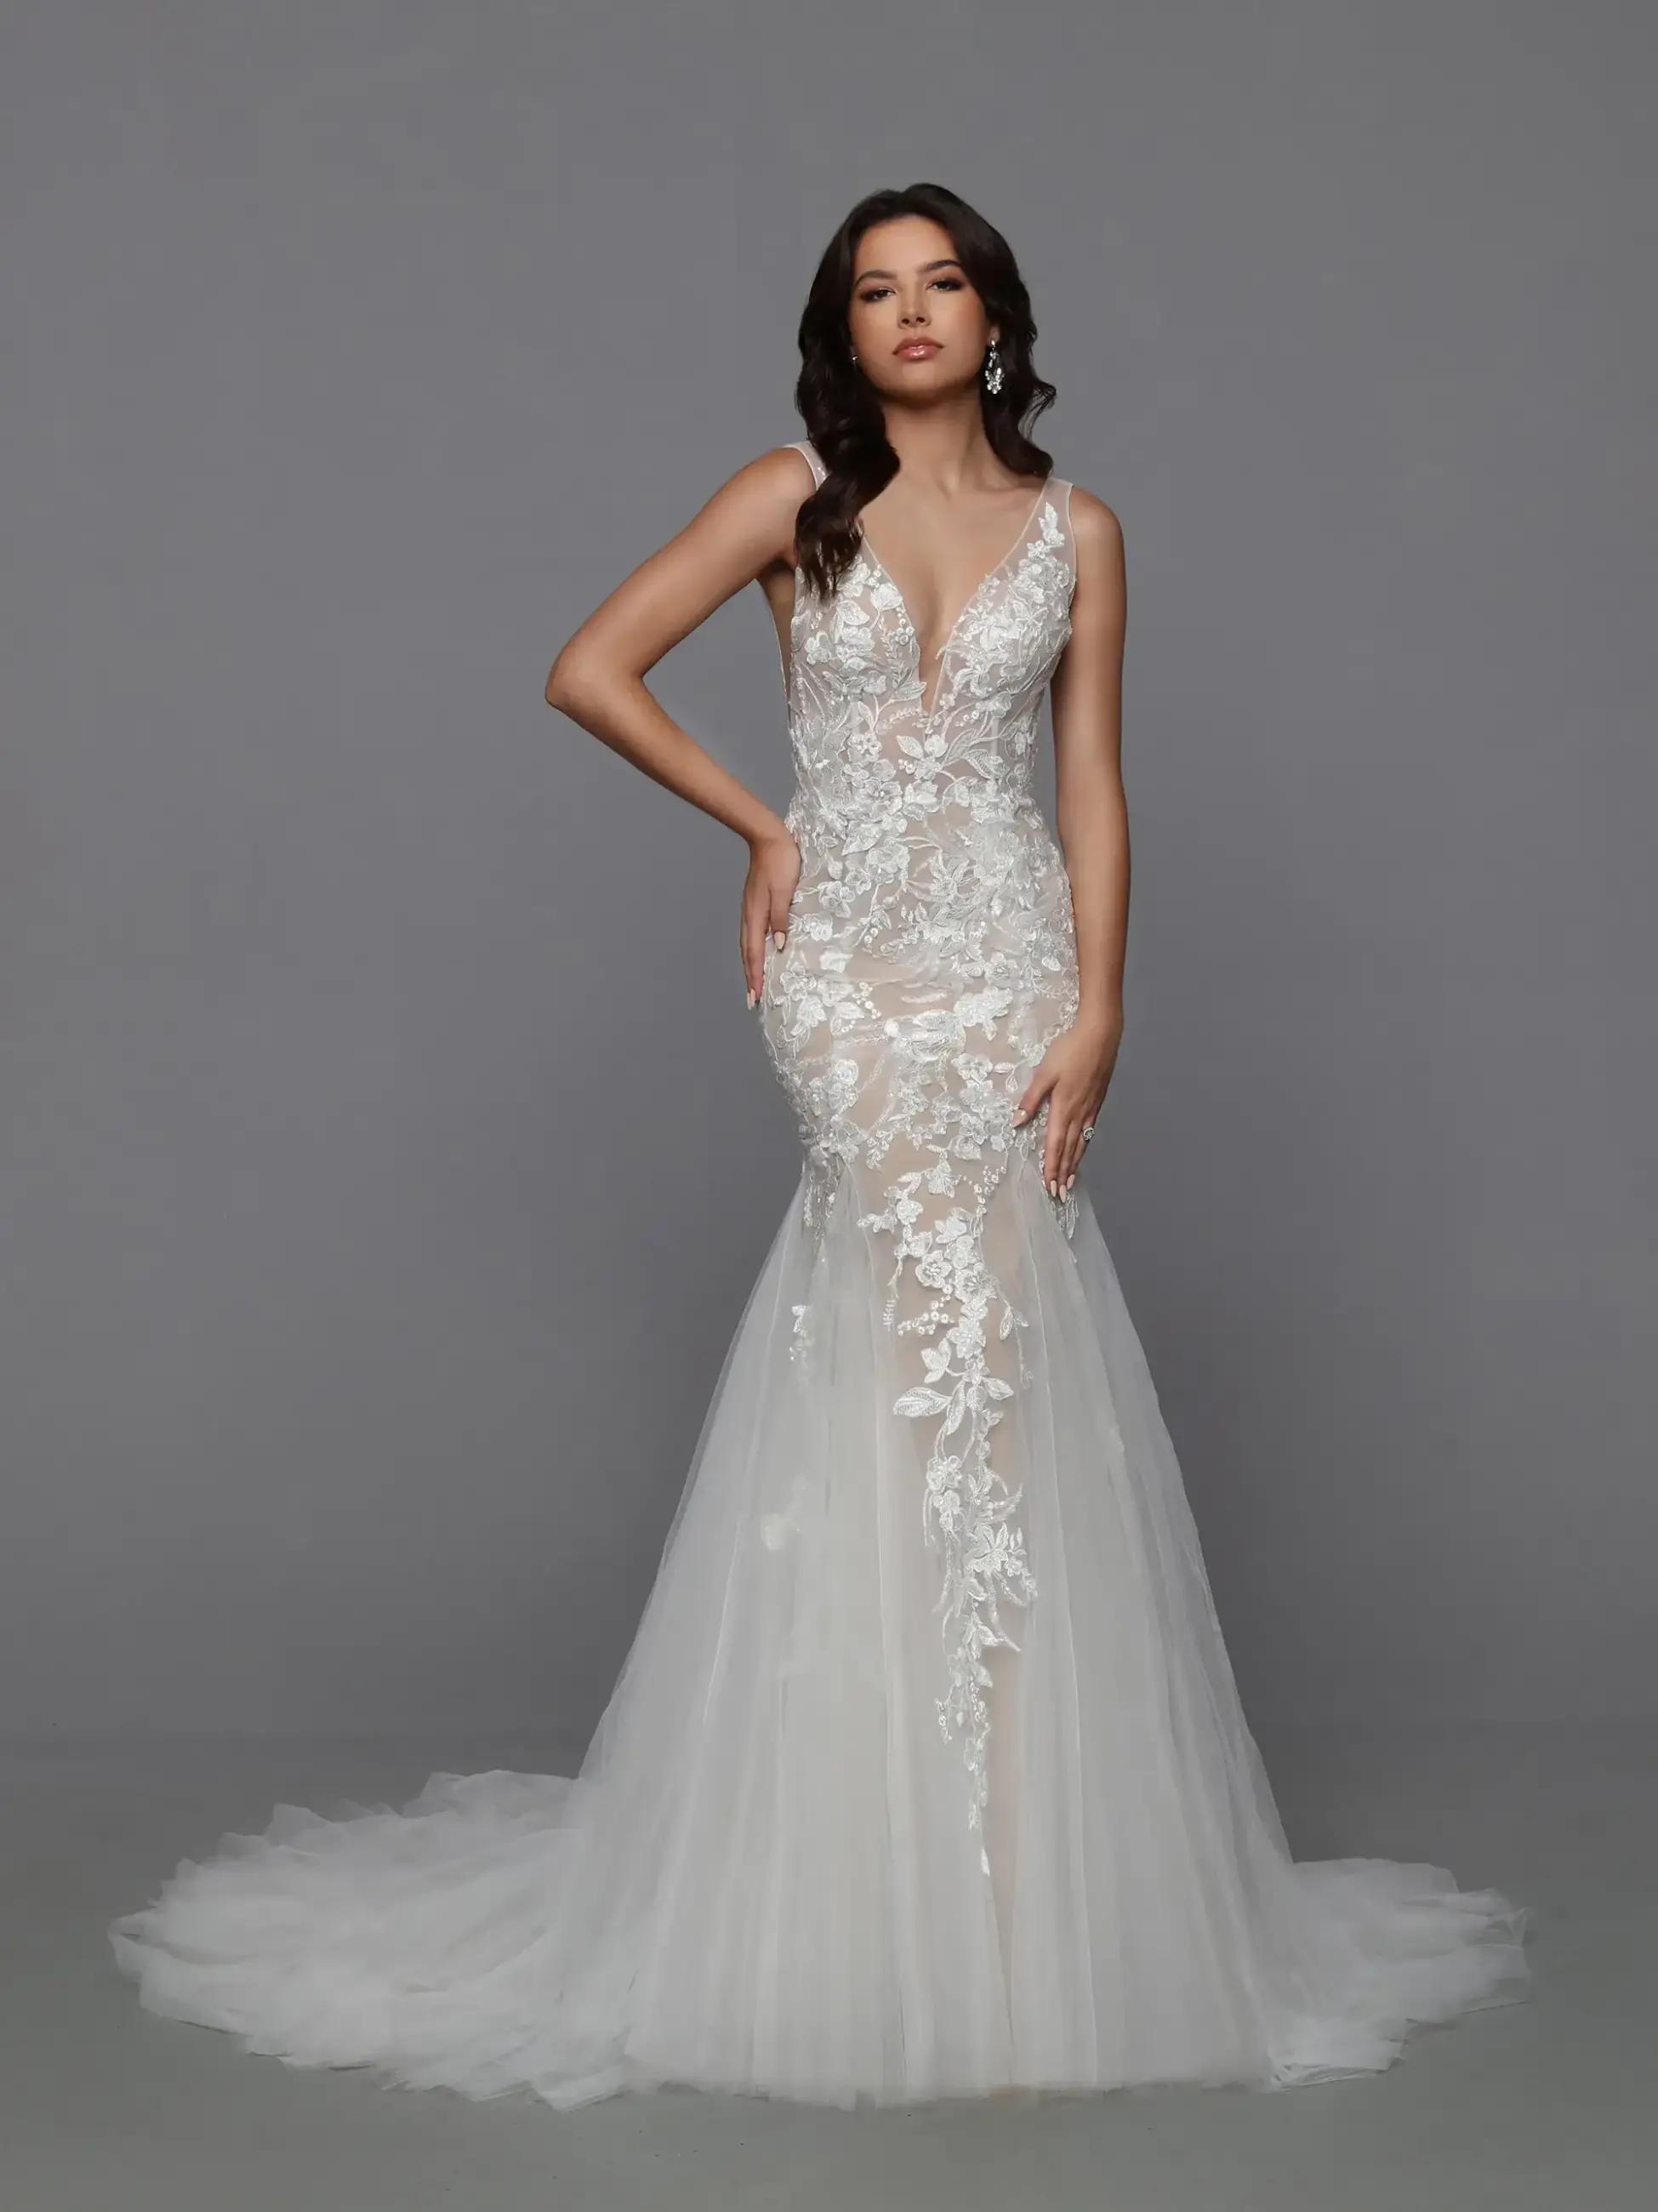 Find Your Dream Wedding Gown in our Budget Dresses! Image